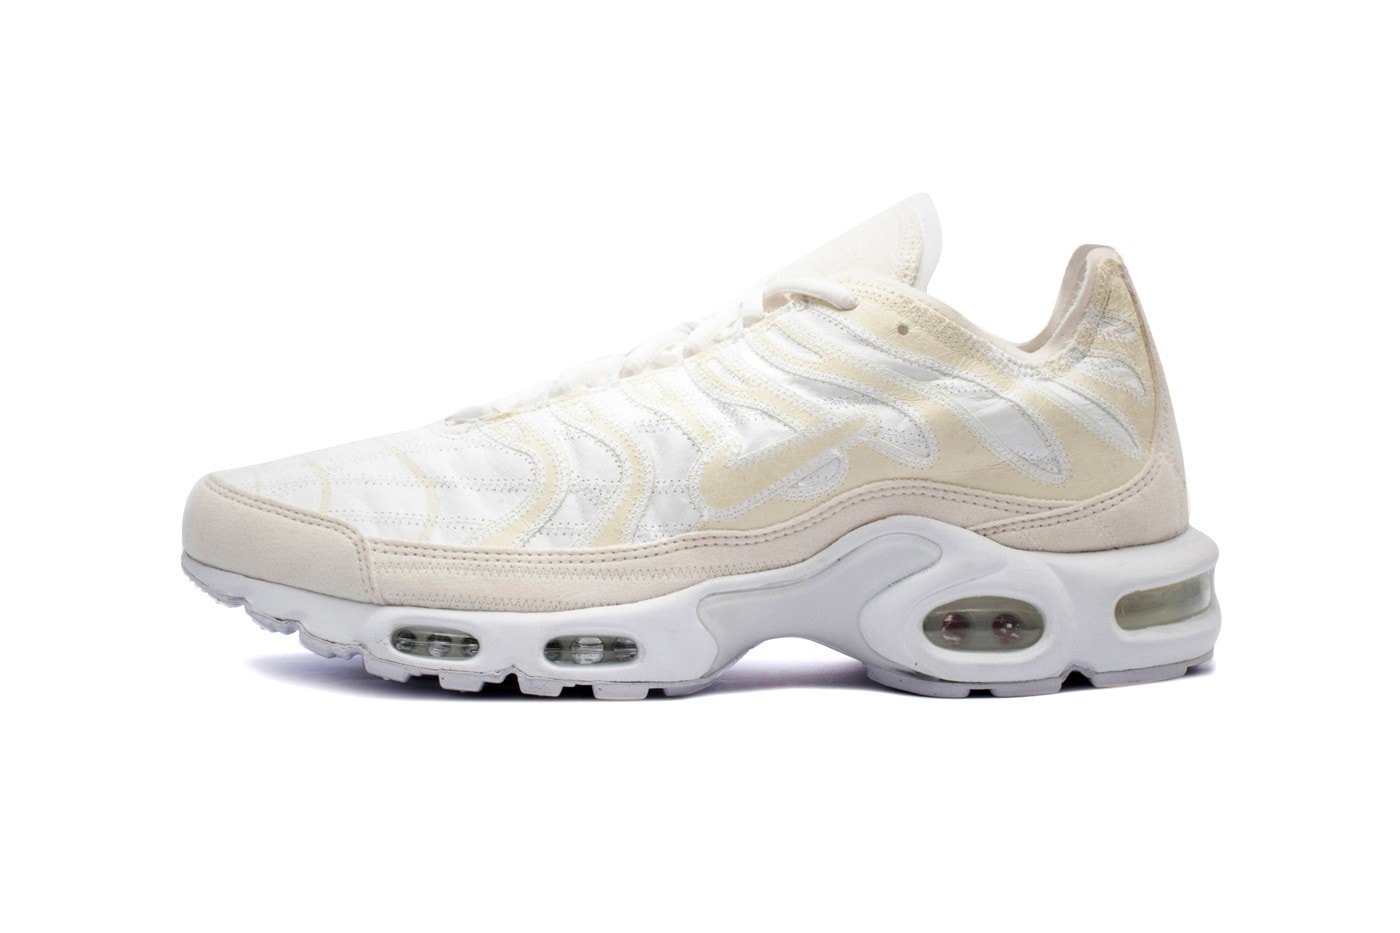 Nike Air Max Plus Deconstructed Beige White